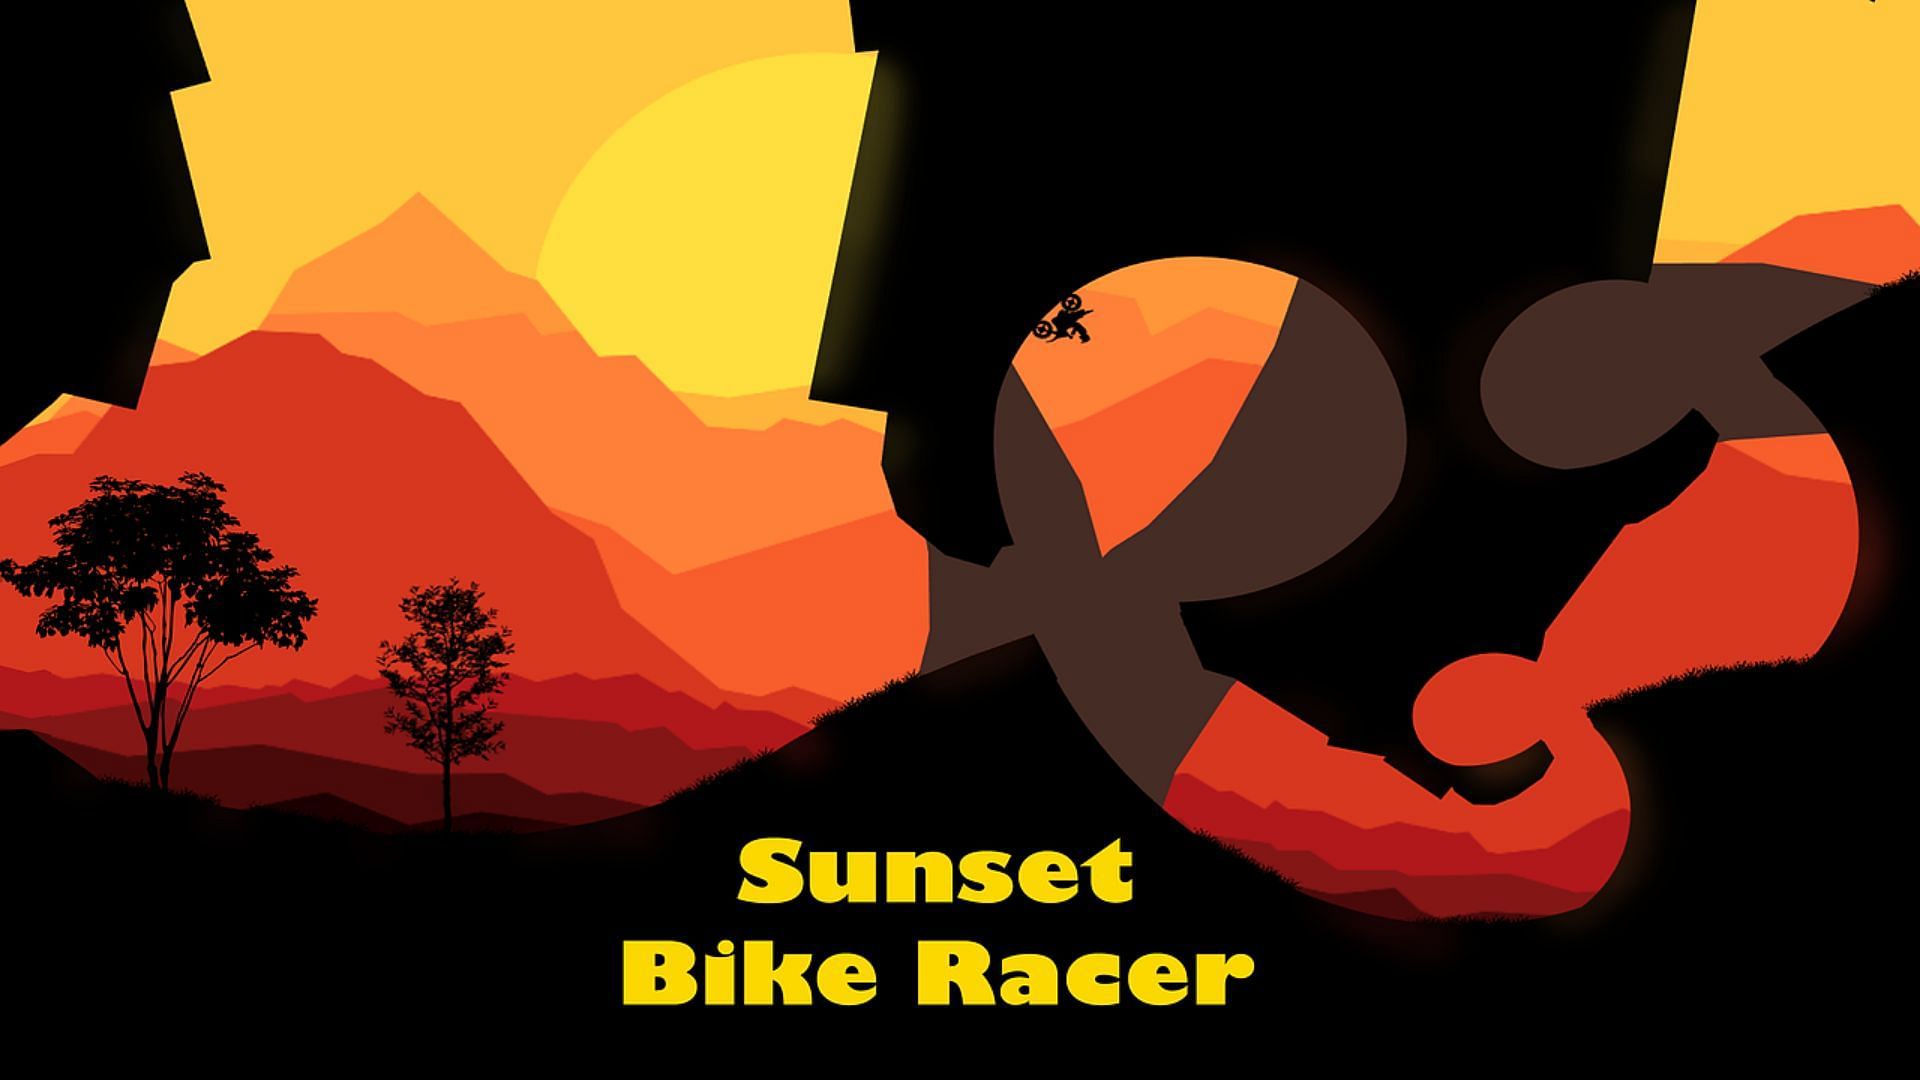 Perform acrobatic stunts and aim for a high score in Sunset Bike Racer. (Image via Kam Gam)